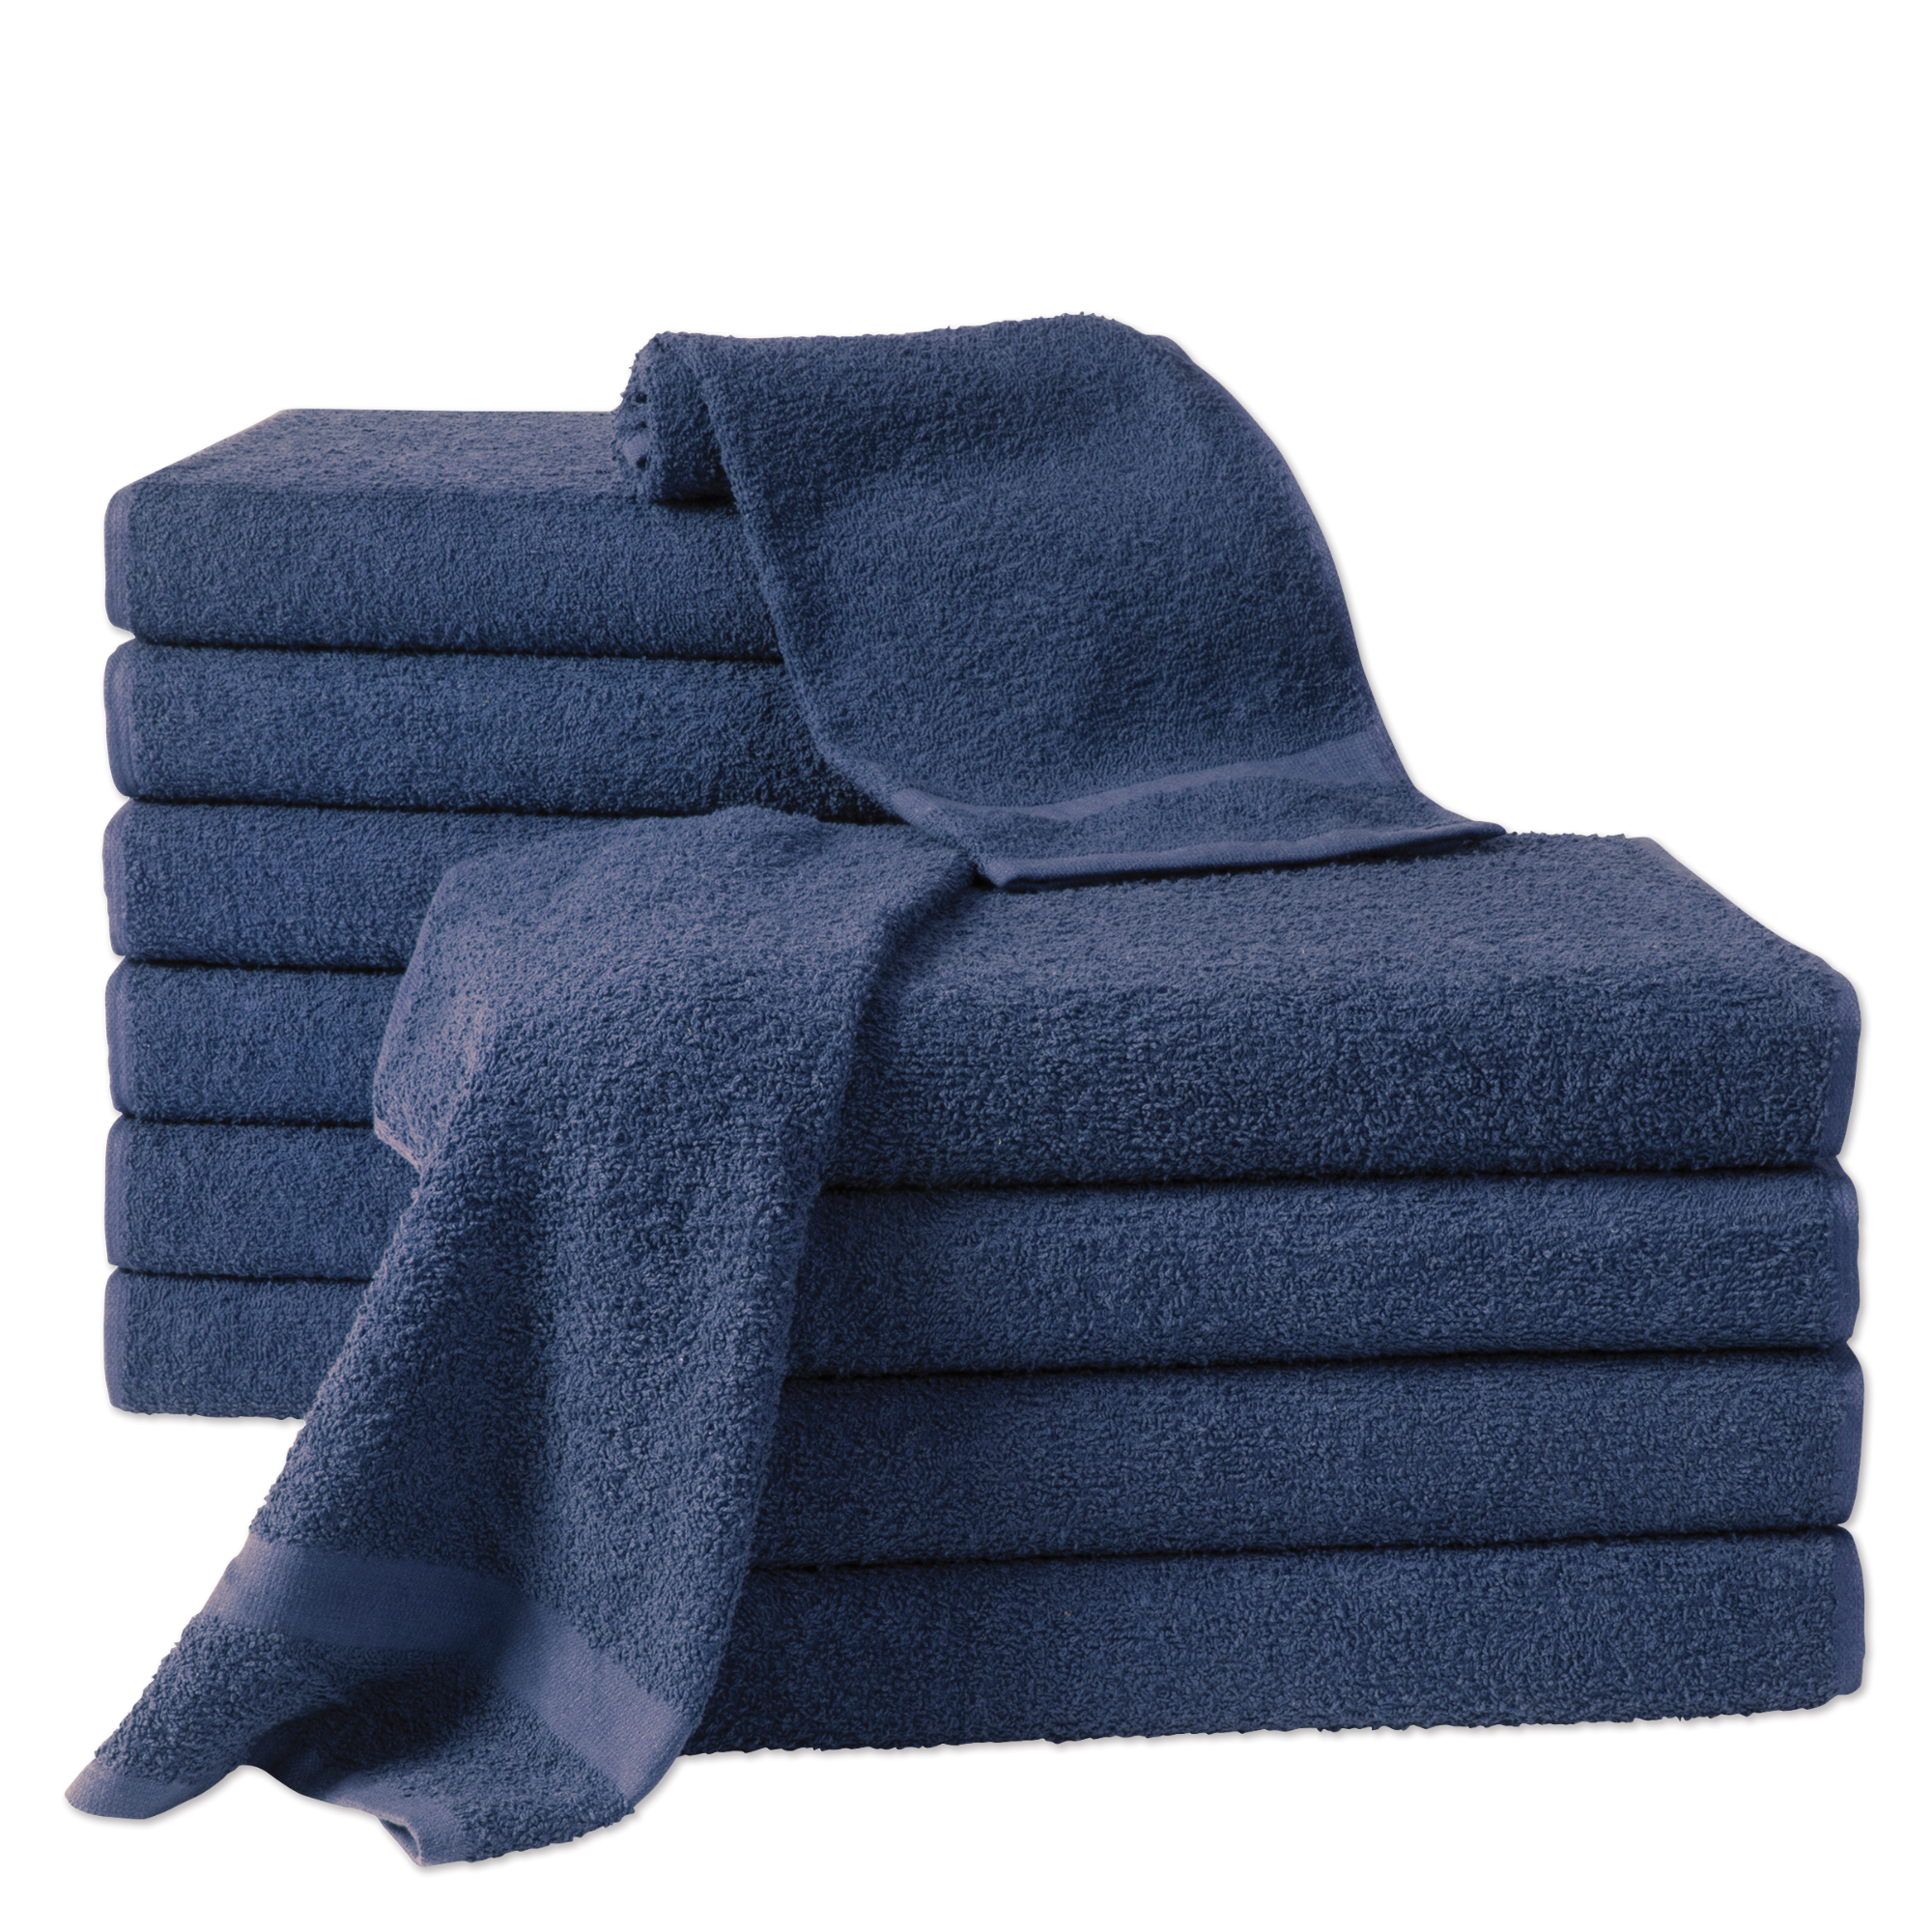 Cotton Towels, 15" x 25", 2-1/4 lbs.